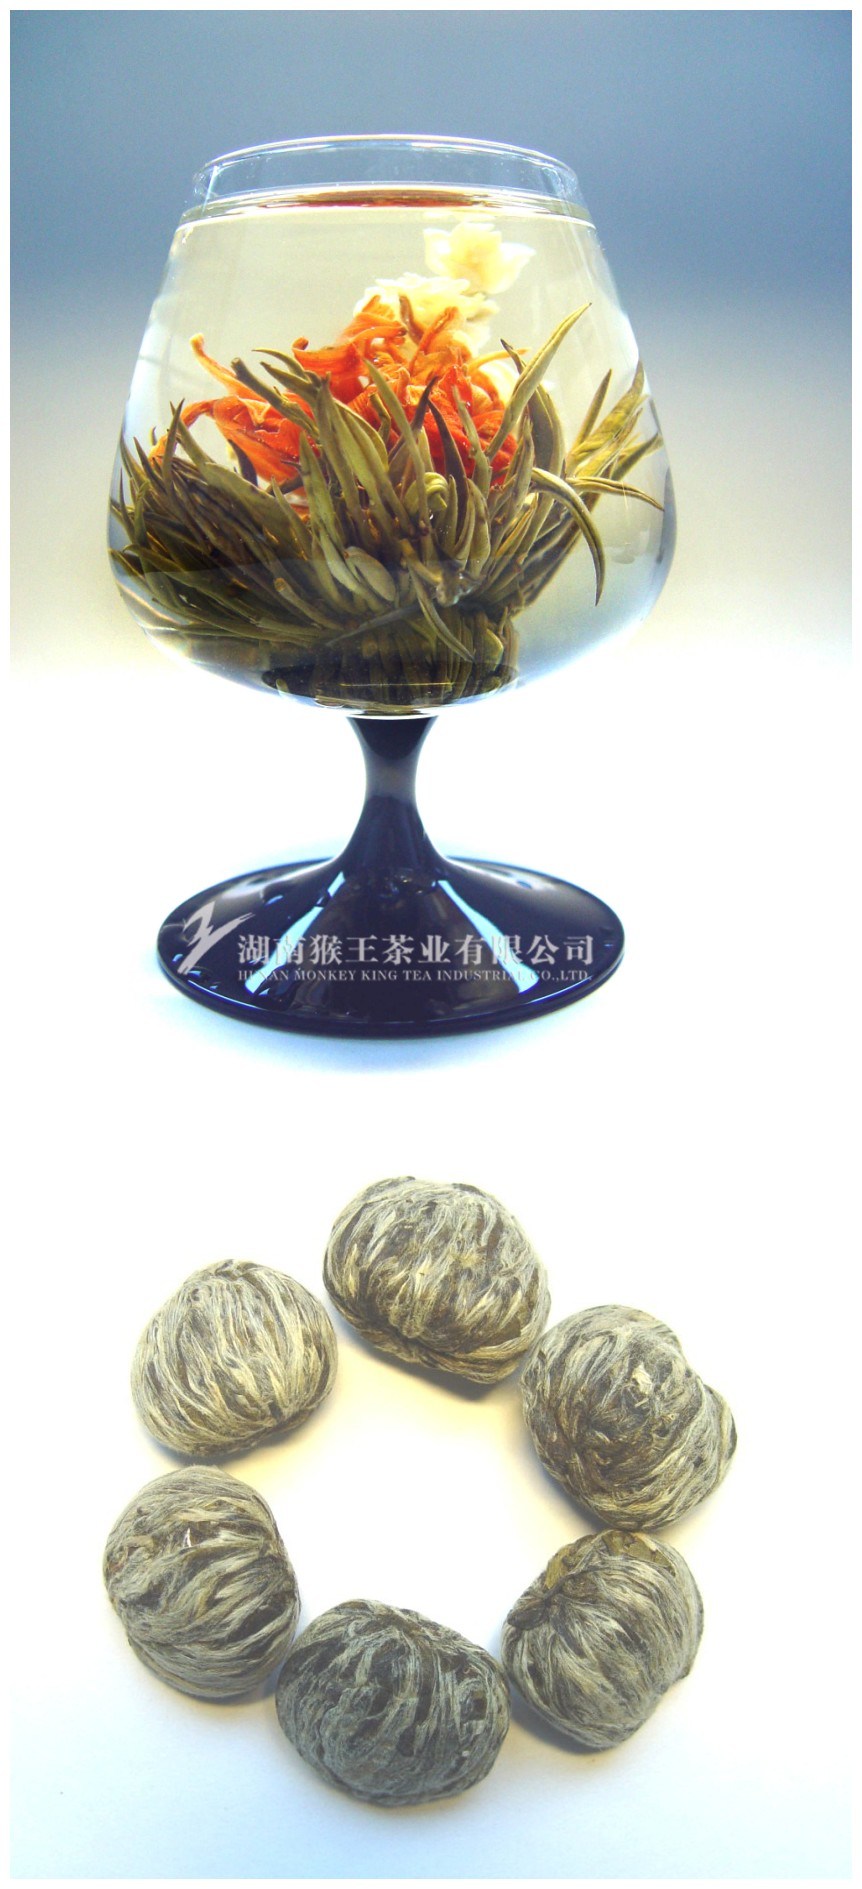 Speciality 100% Natural Flower Tea, Hand-Made Beauty Tea, Blooming Spring Melody 8909